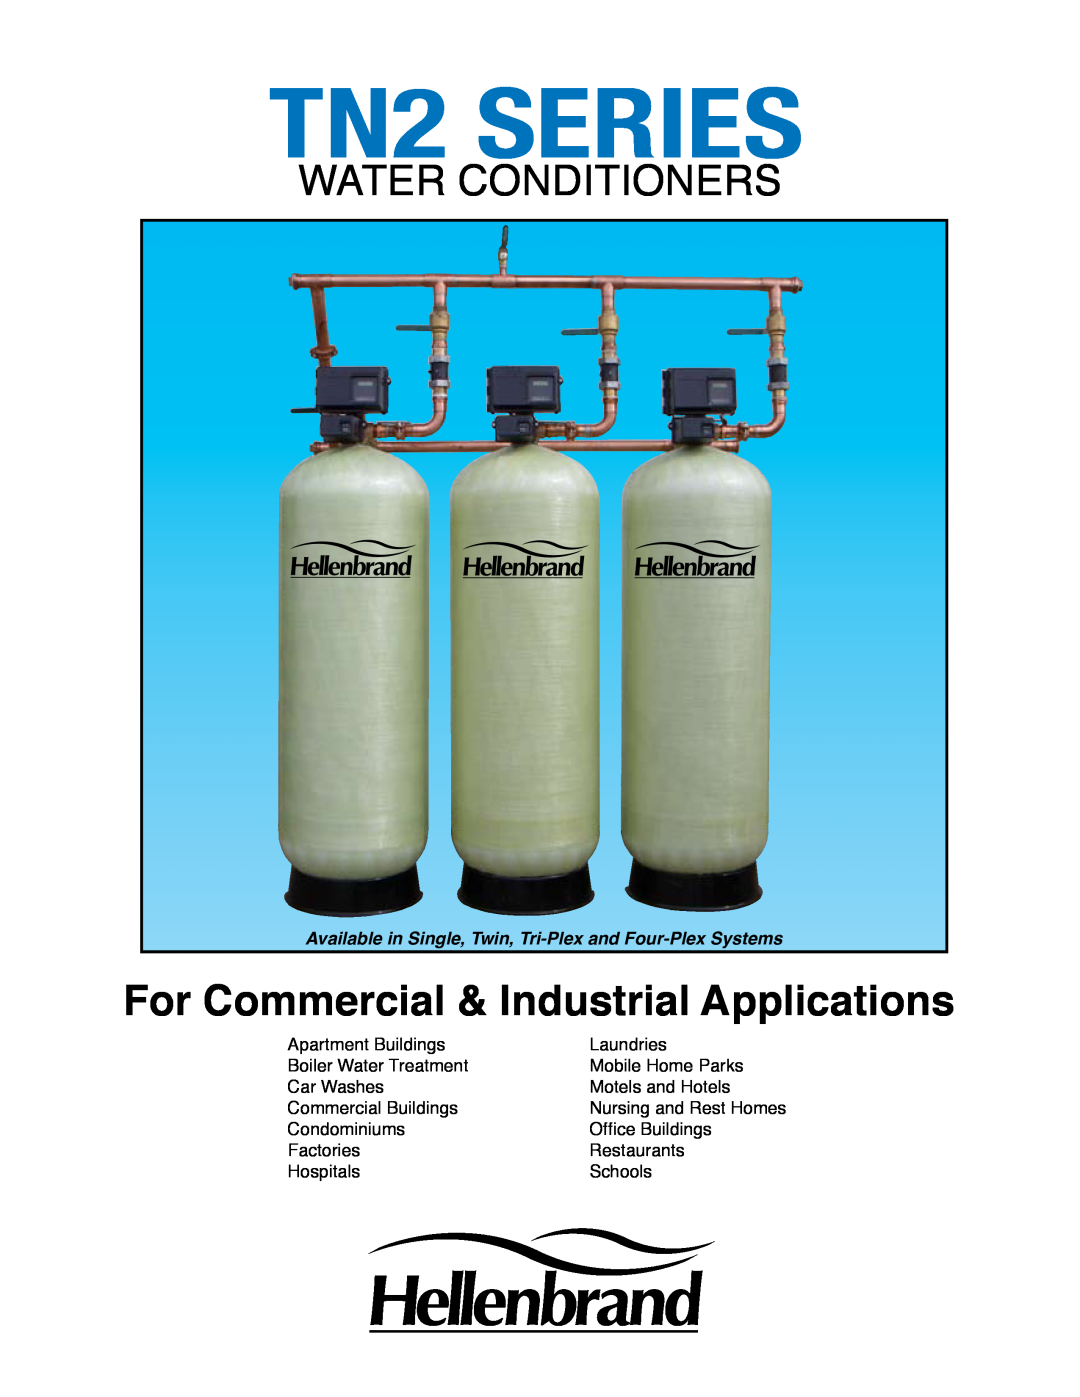 Hellenbrand TN2 Series manual TN2 SERIES, Water Conditioners, For Commercial & Industrial Applications 